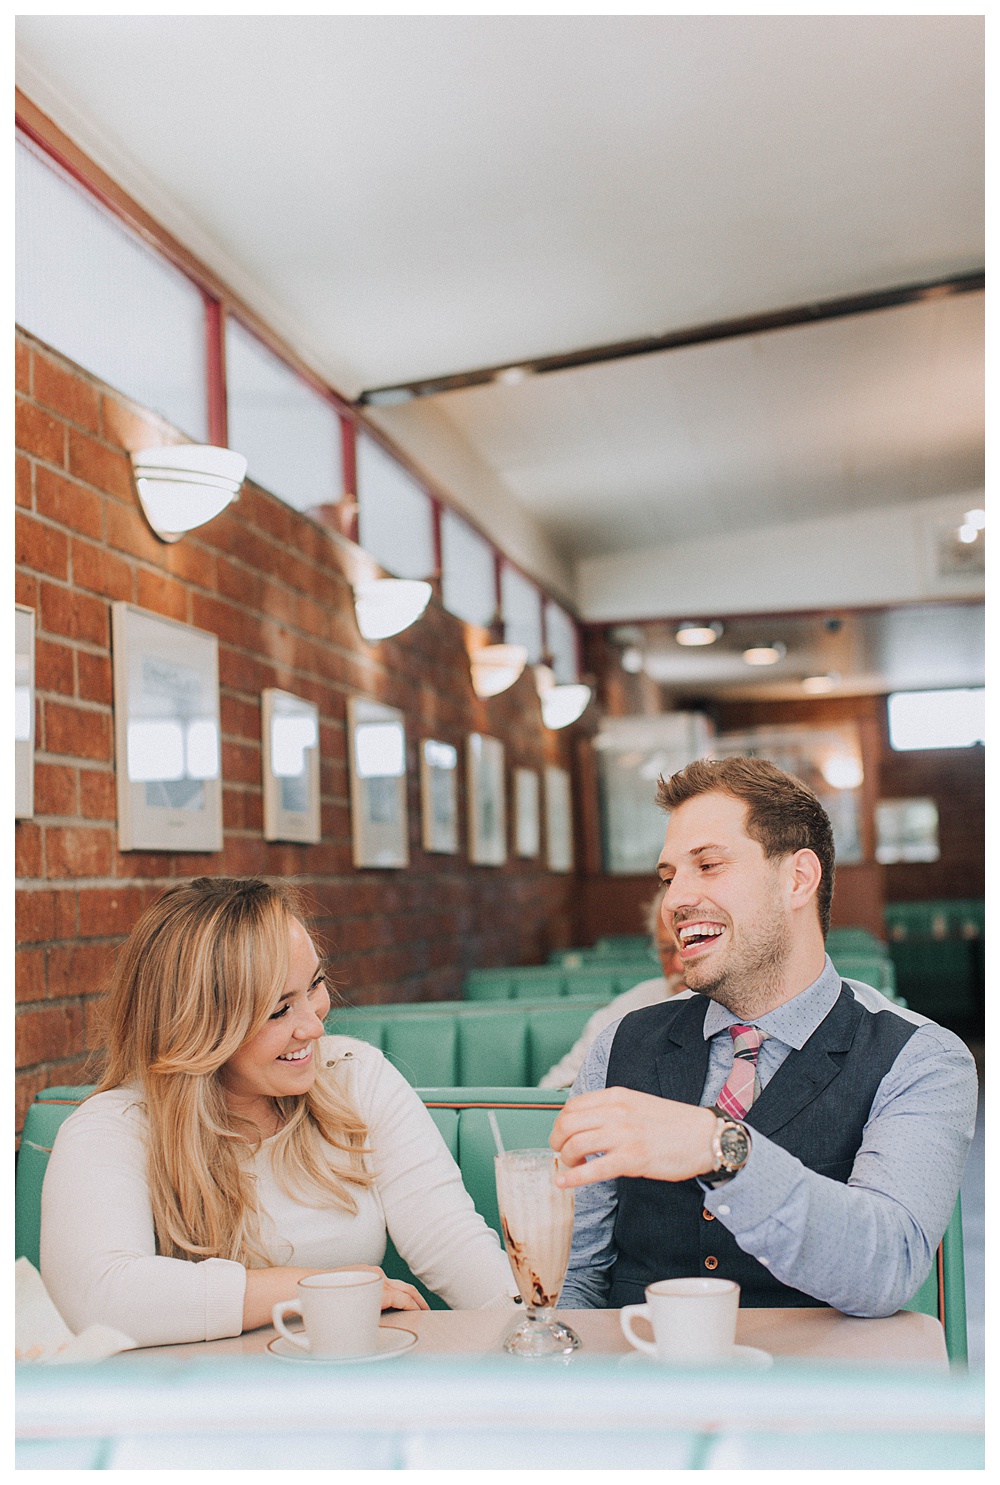 Rod's Diner | 50's Inspired Engagement Photography | Altadena 